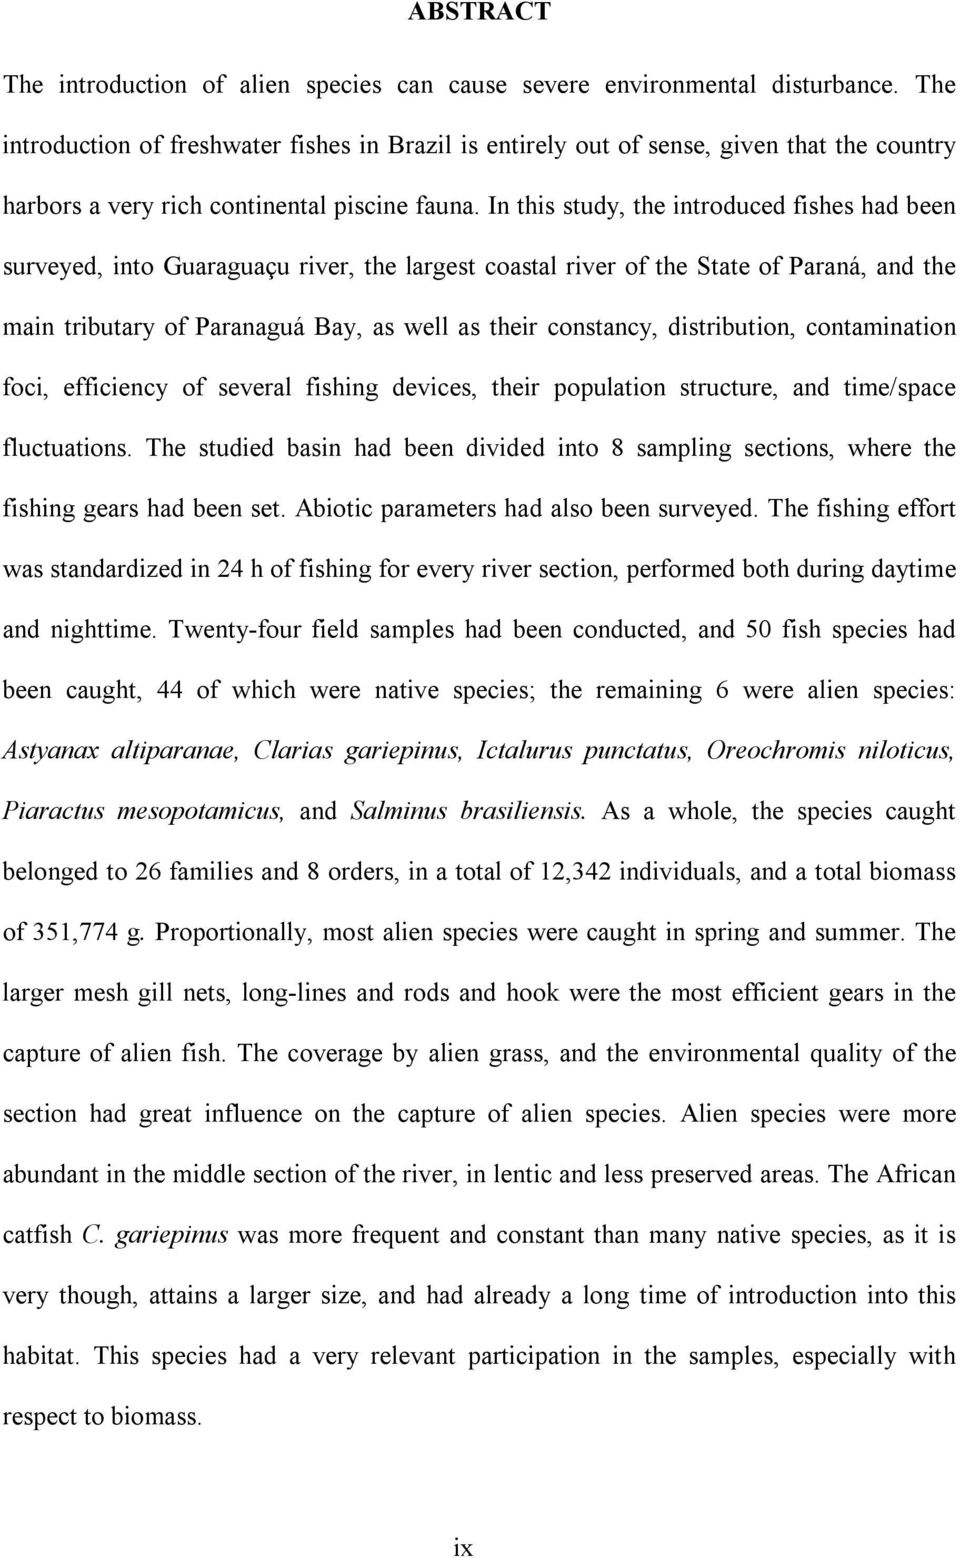 In this study, the introduced fishes had been surveyed, into Guaraguaçu river, the largest coastal river of the State of Paraná, and the main tributary of Paranaguá Bay, as well as their constancy,